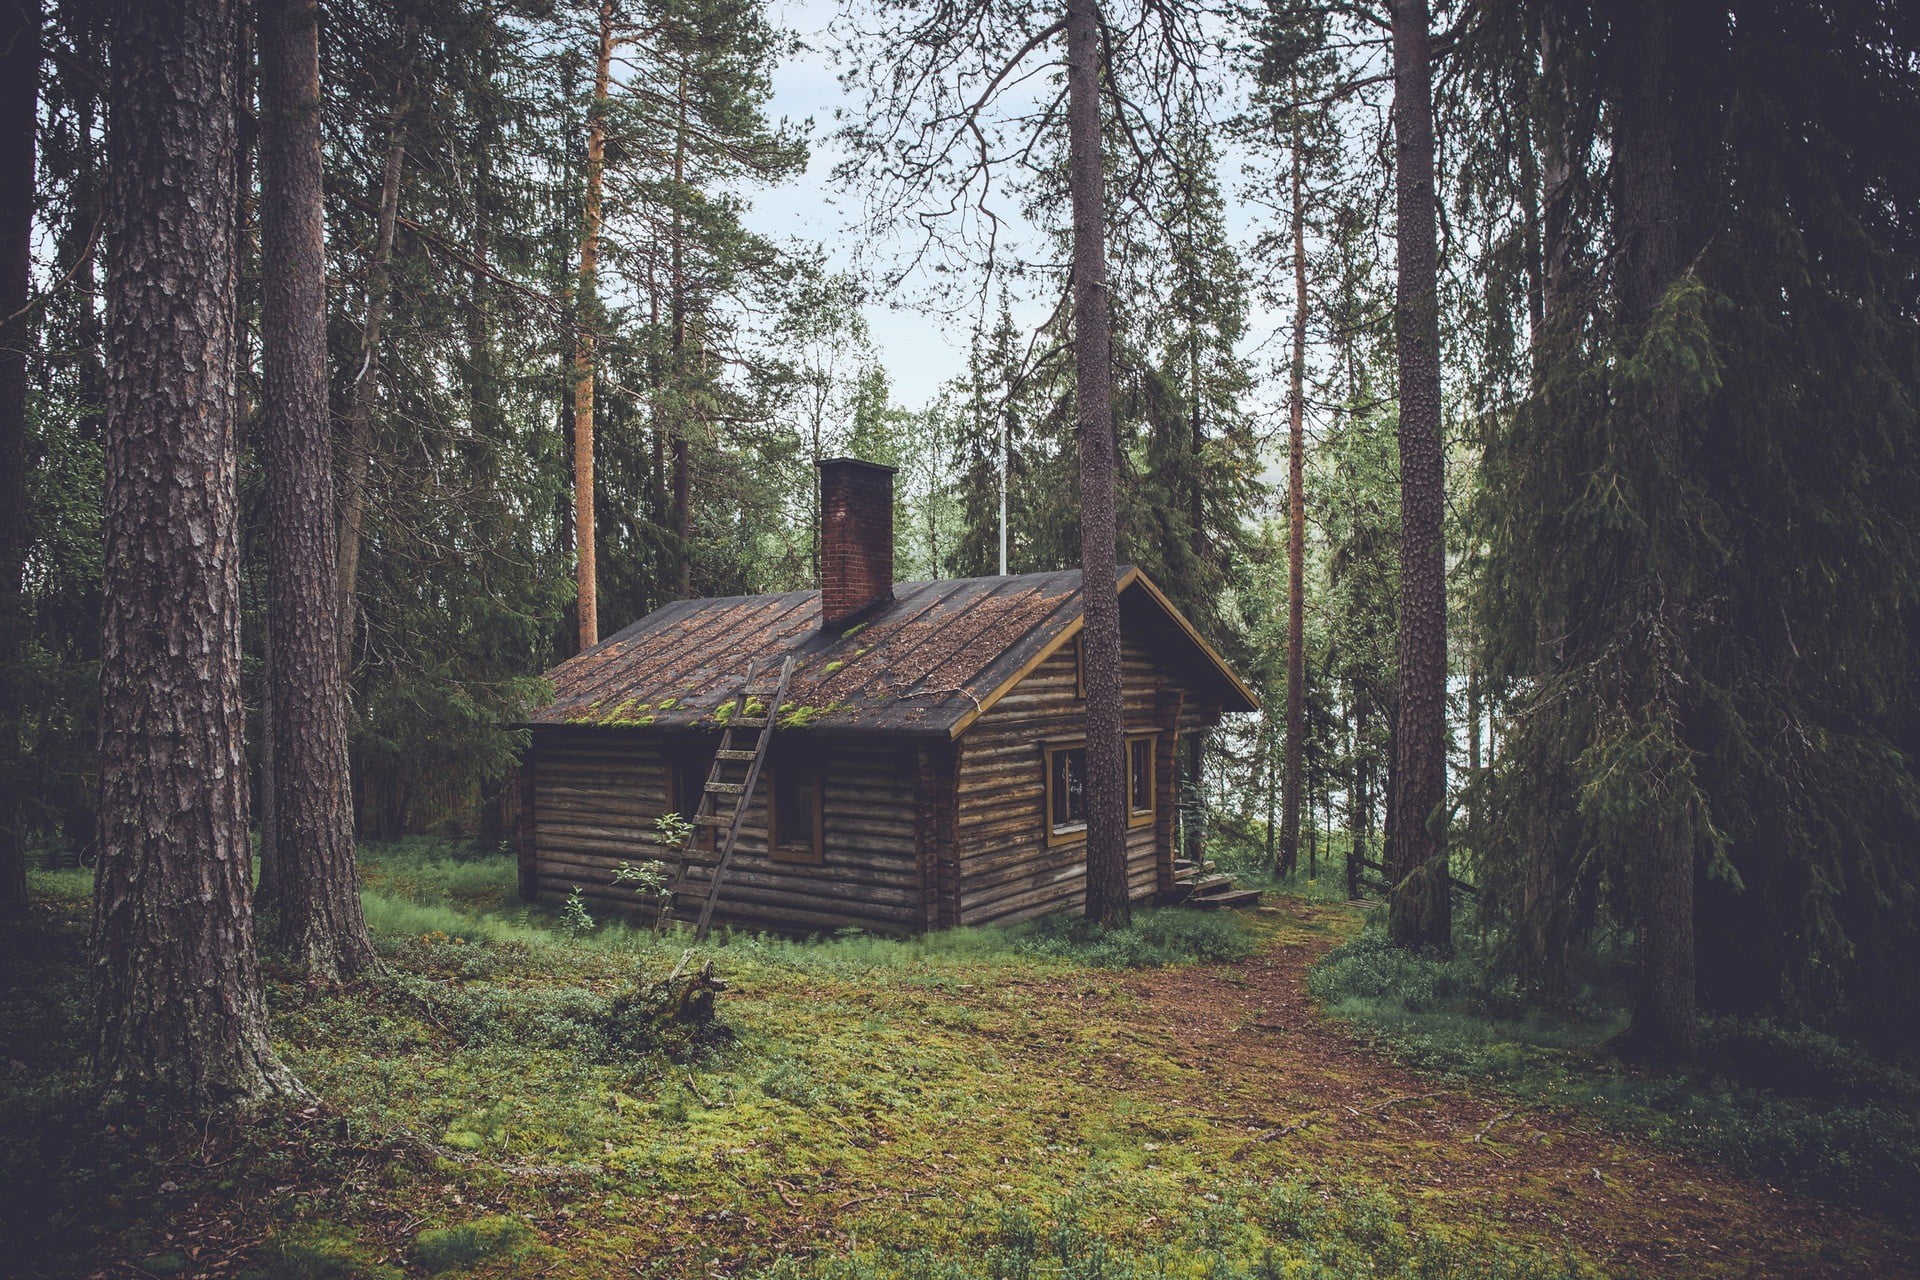 brown wooden house, cabin surrounded by forest trees, landscape